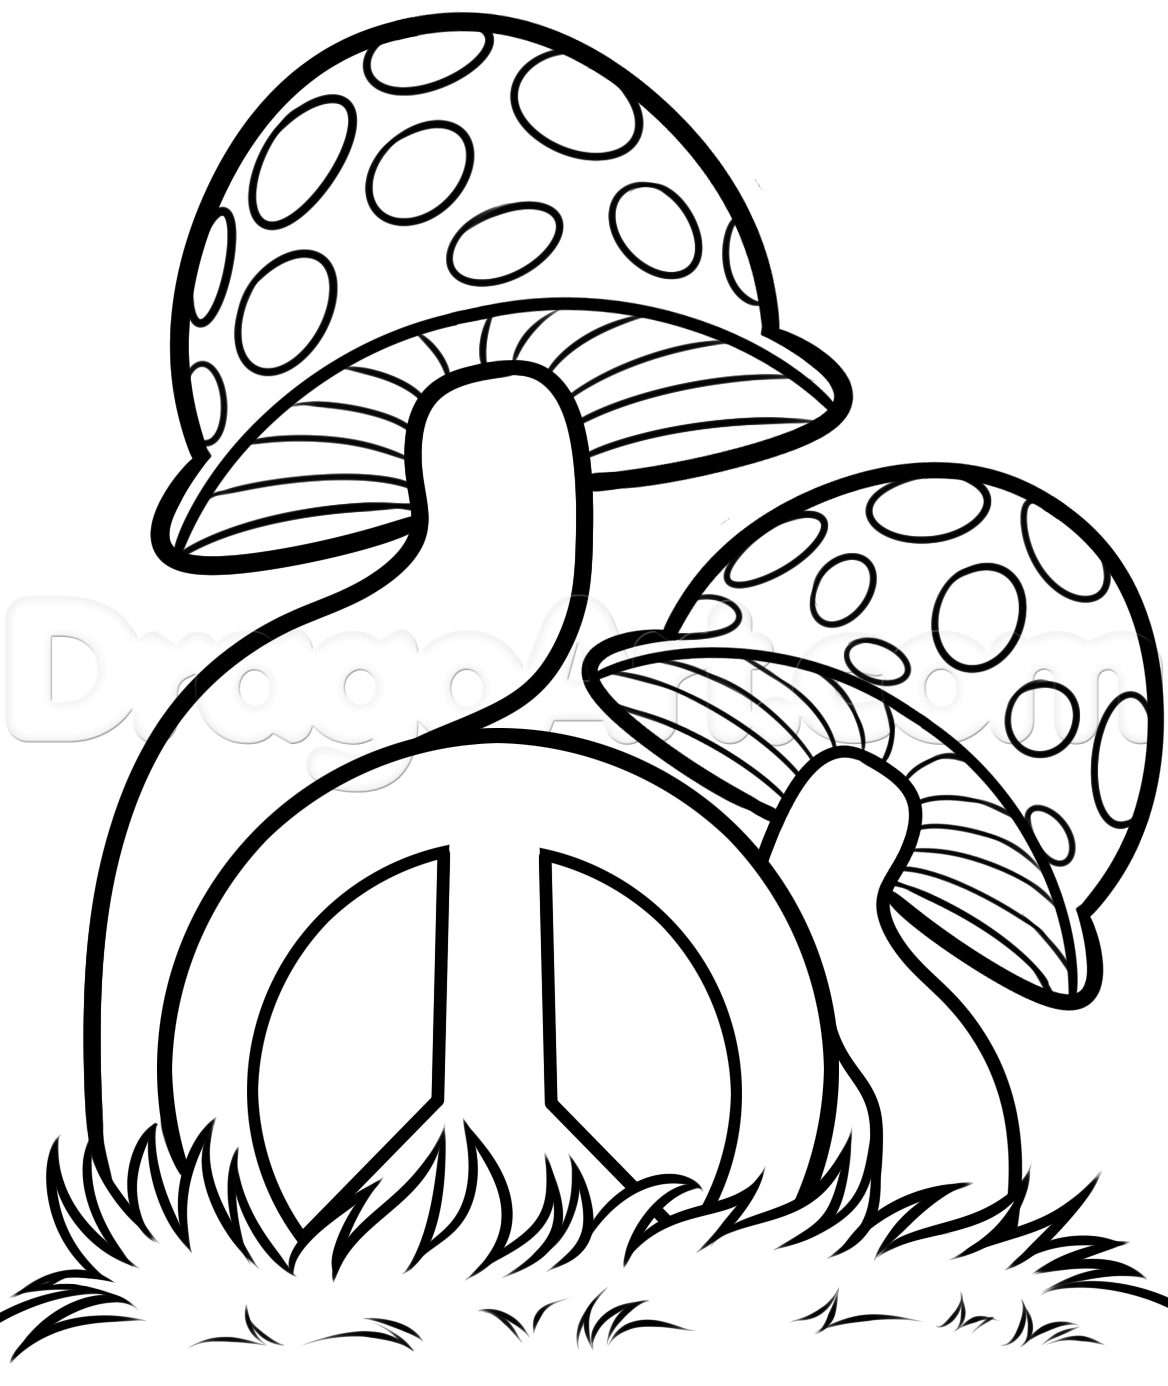 30+ Trends Ideas Trippy Mushroom Drawing Black And White - Mariam Finlayson